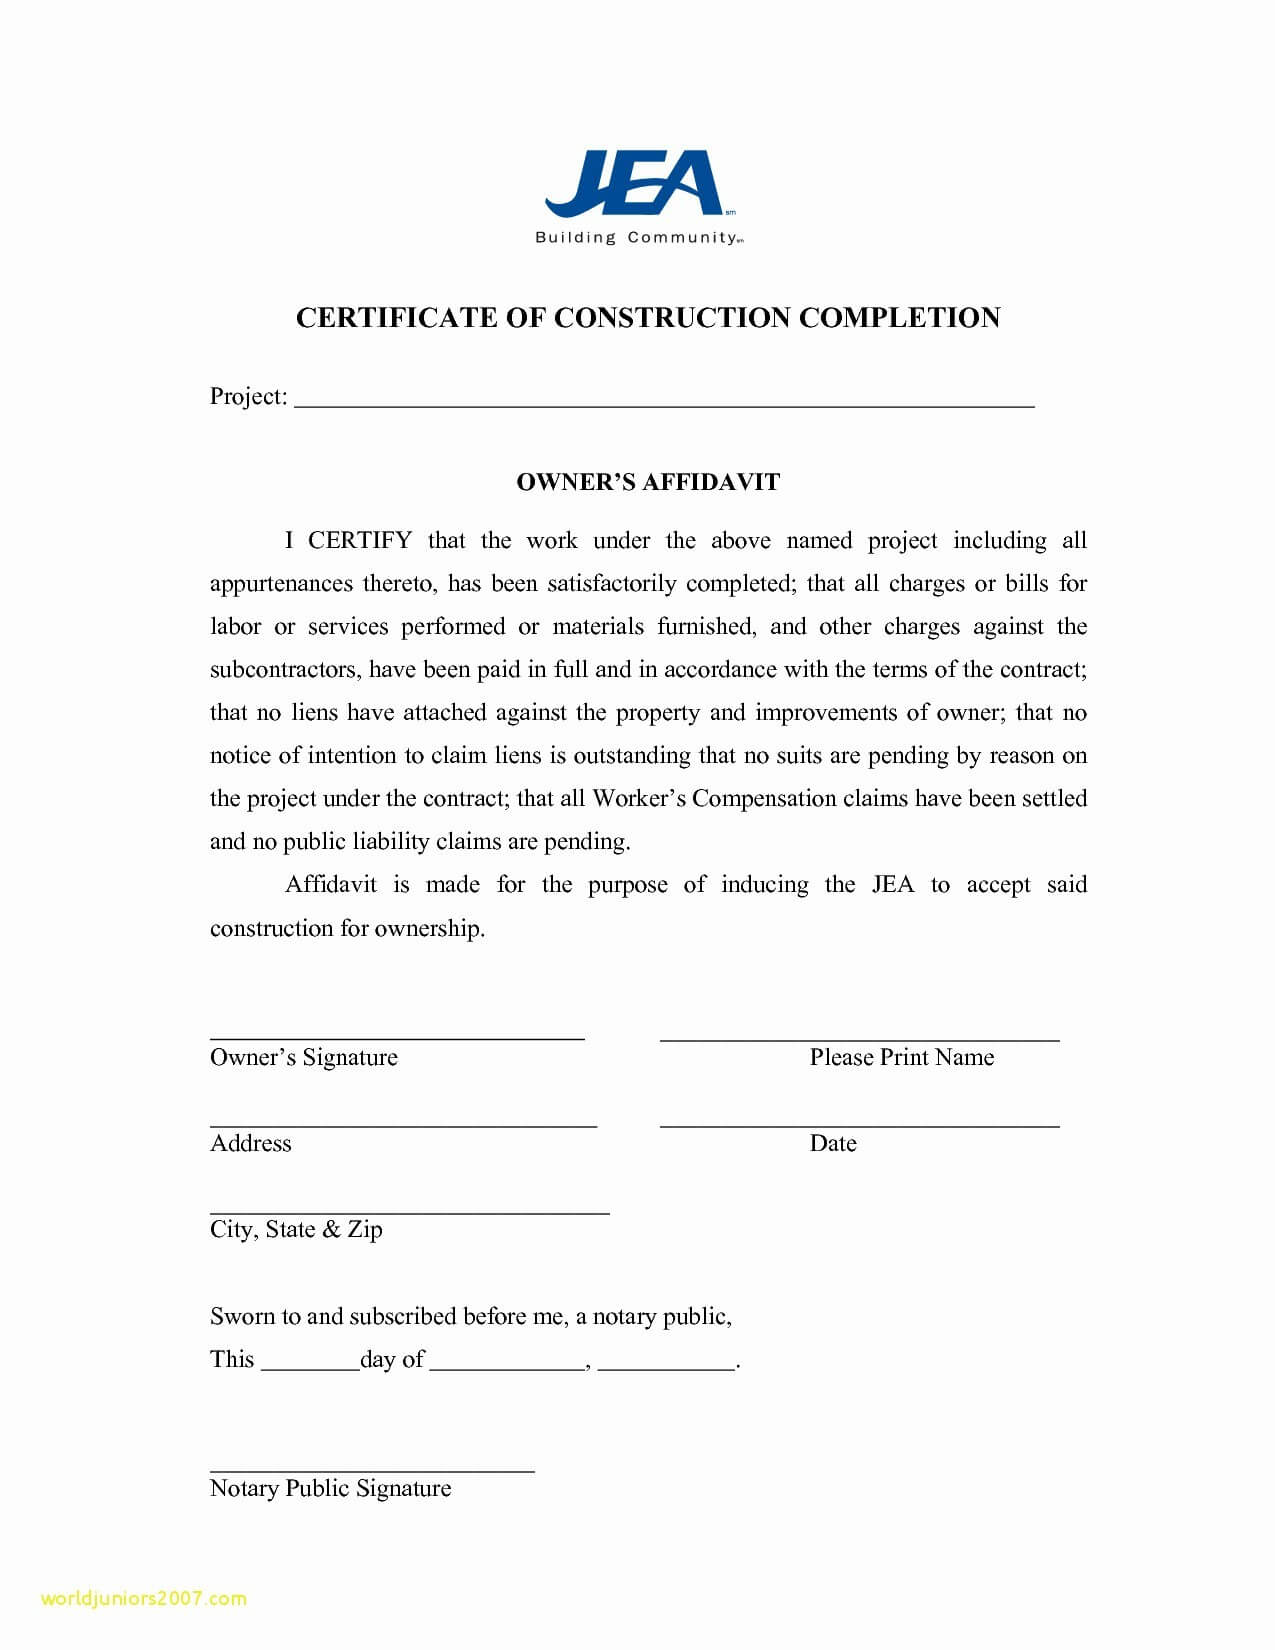 Letter Of Substantial Completion Template Examples | Letter Intended For Jct Practical Completion Certificate Template